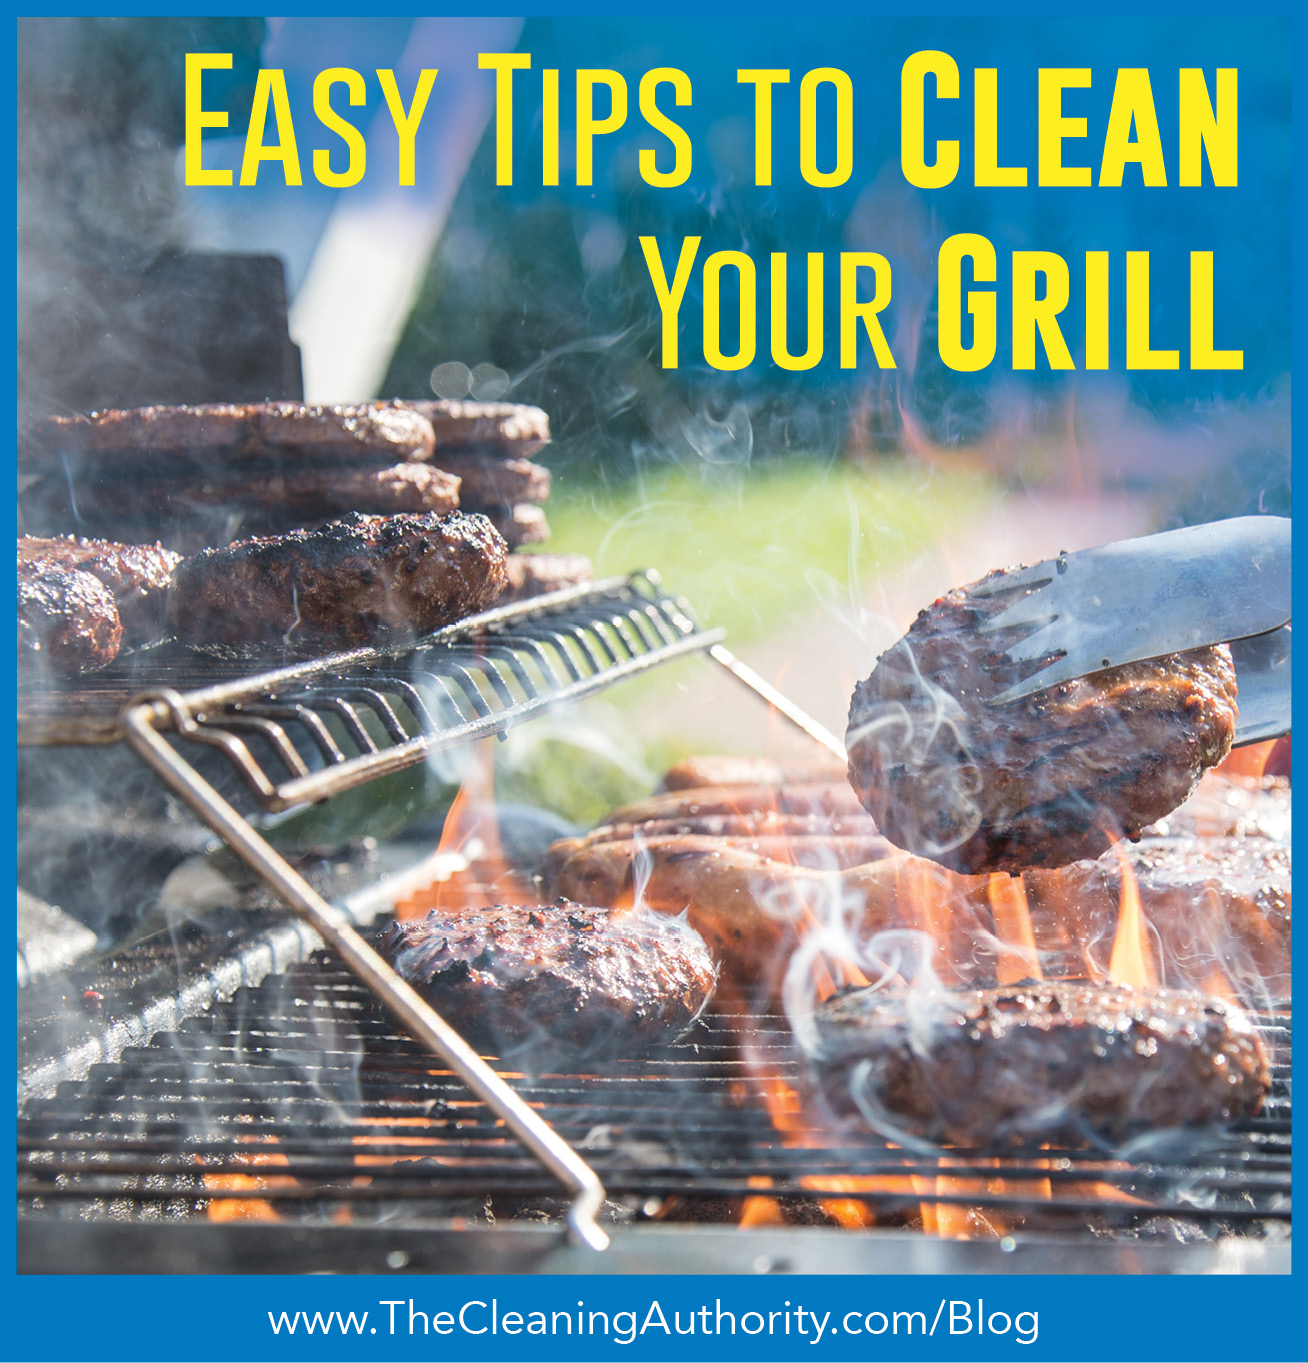 https://www.thecleaningauthority.com/images/articles/Cleaning-Your-Grill_Header.jpg